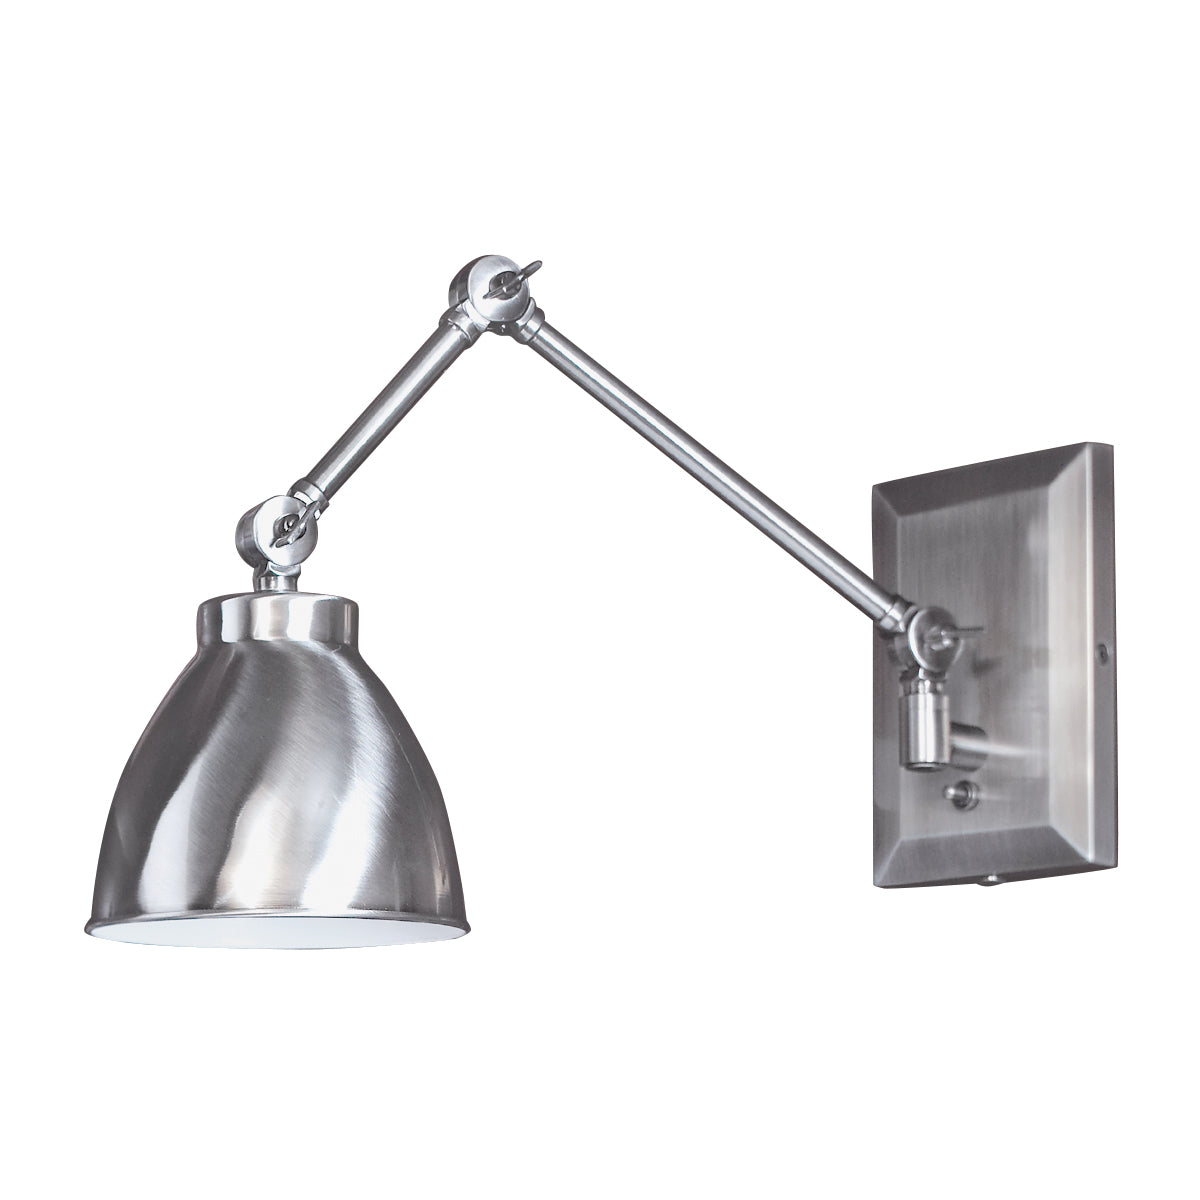 Norwell Lighting 8471-PW-MS Maggie One Light Swing Arm Wall Sconce Lamp Pewter, Nickel, Silver